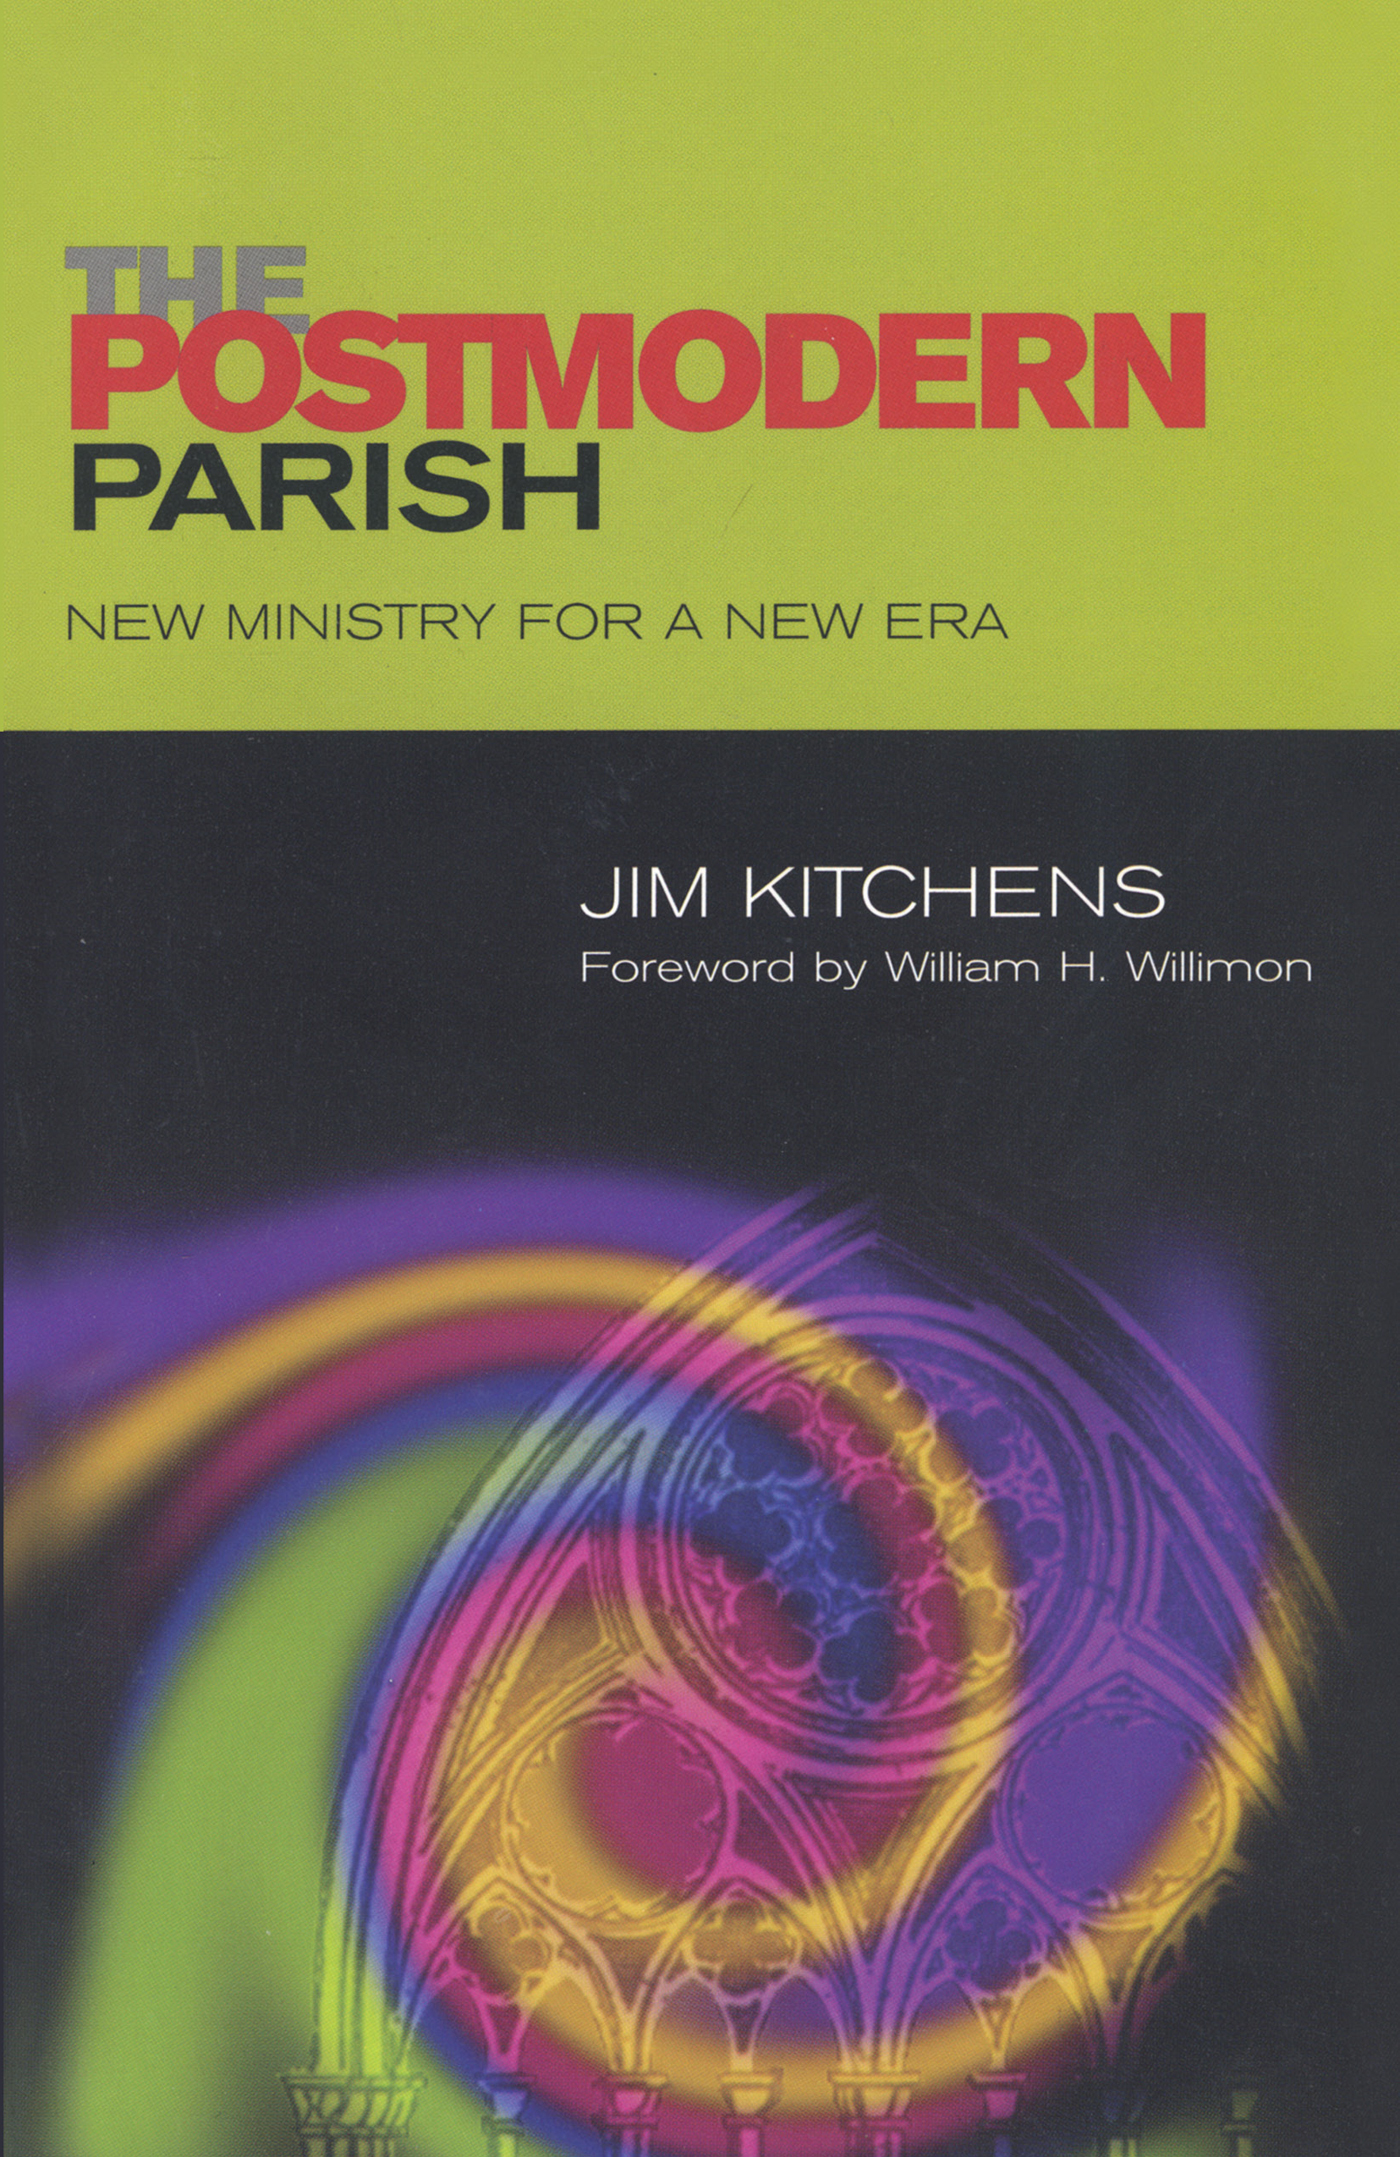 The Postmodern Parish: New Ministry for a New Era